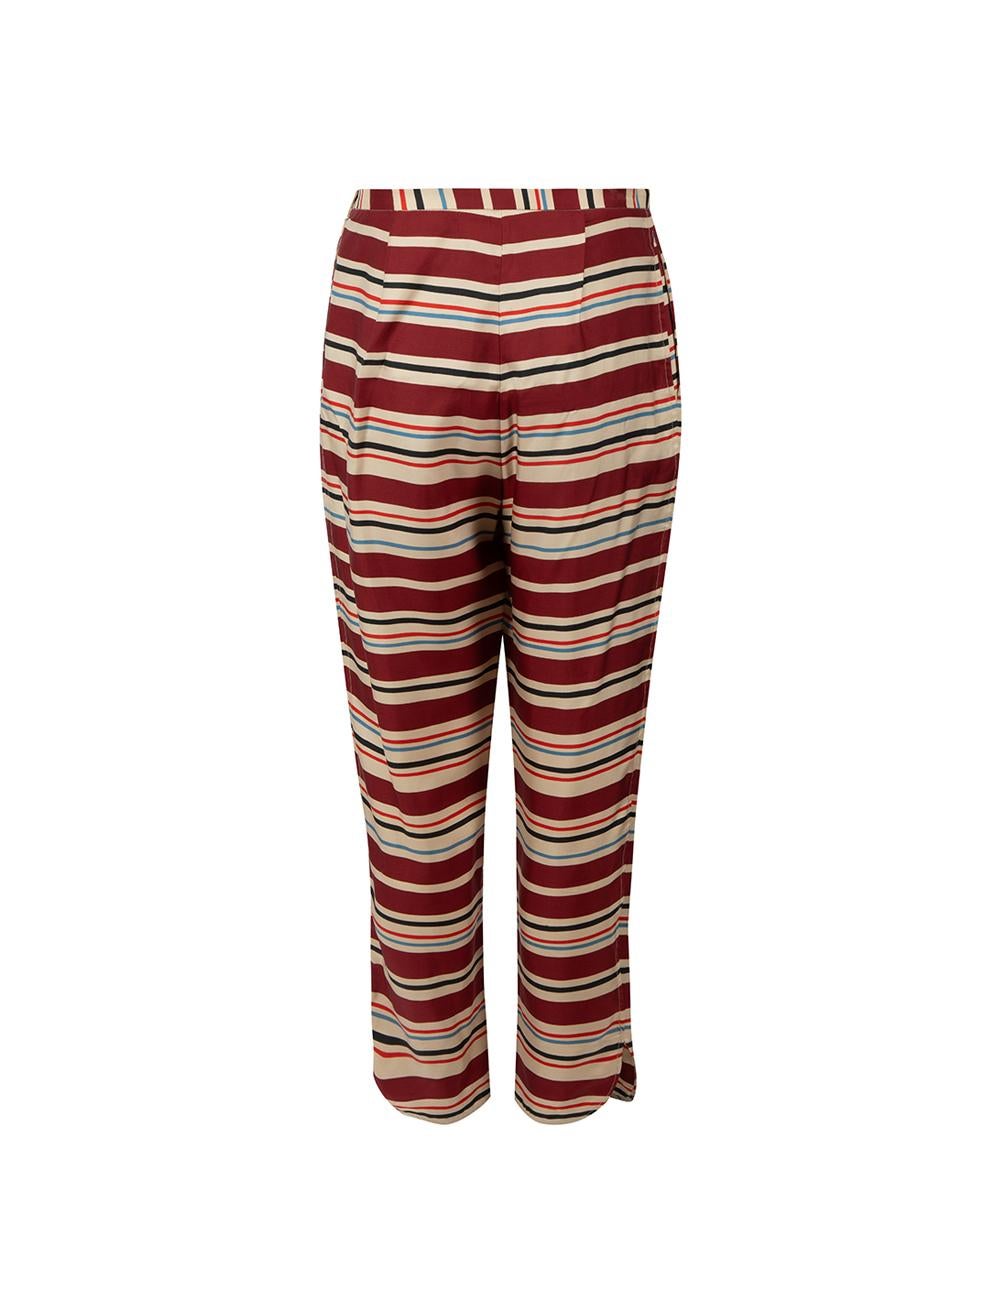 Chloé See by Chloé Burgundy Silk Striped Tapered Trousers Size S In Good Condition For Sale In London, GB